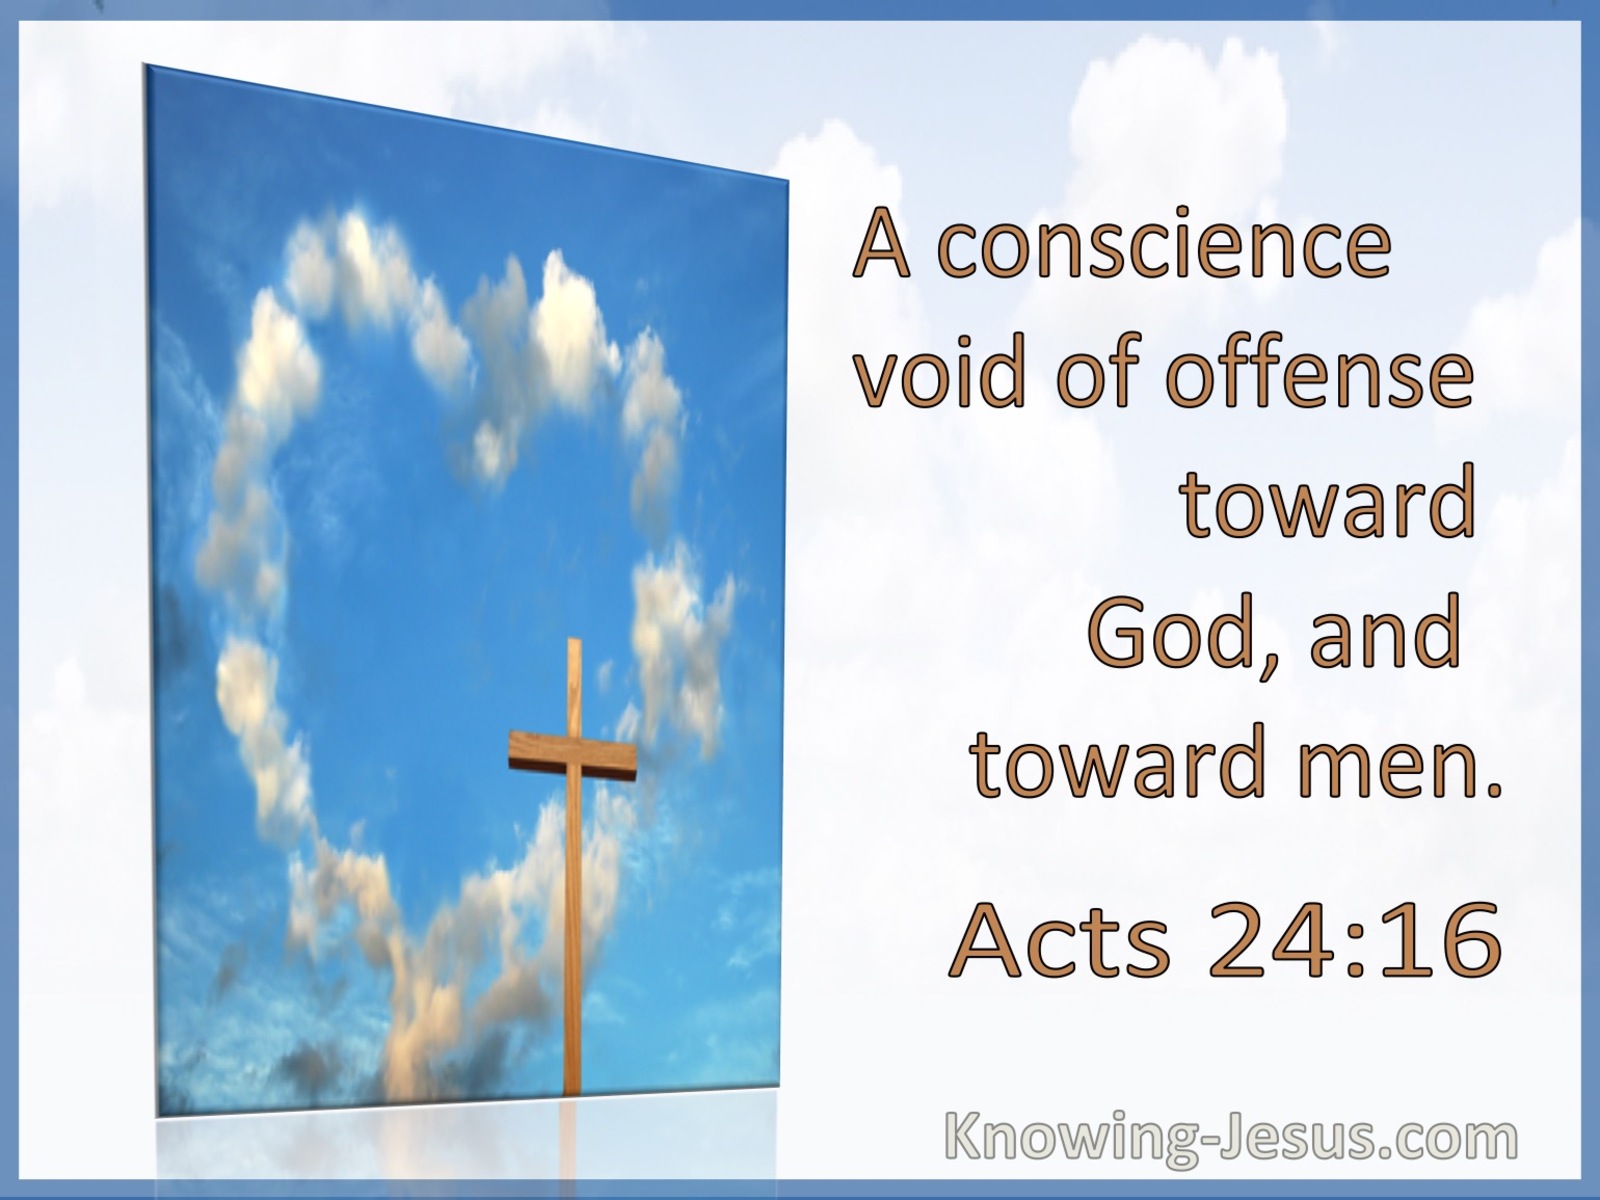 Acts 24:16 A Conscience Void Of Offense Toward God And Men (utmost)05:13